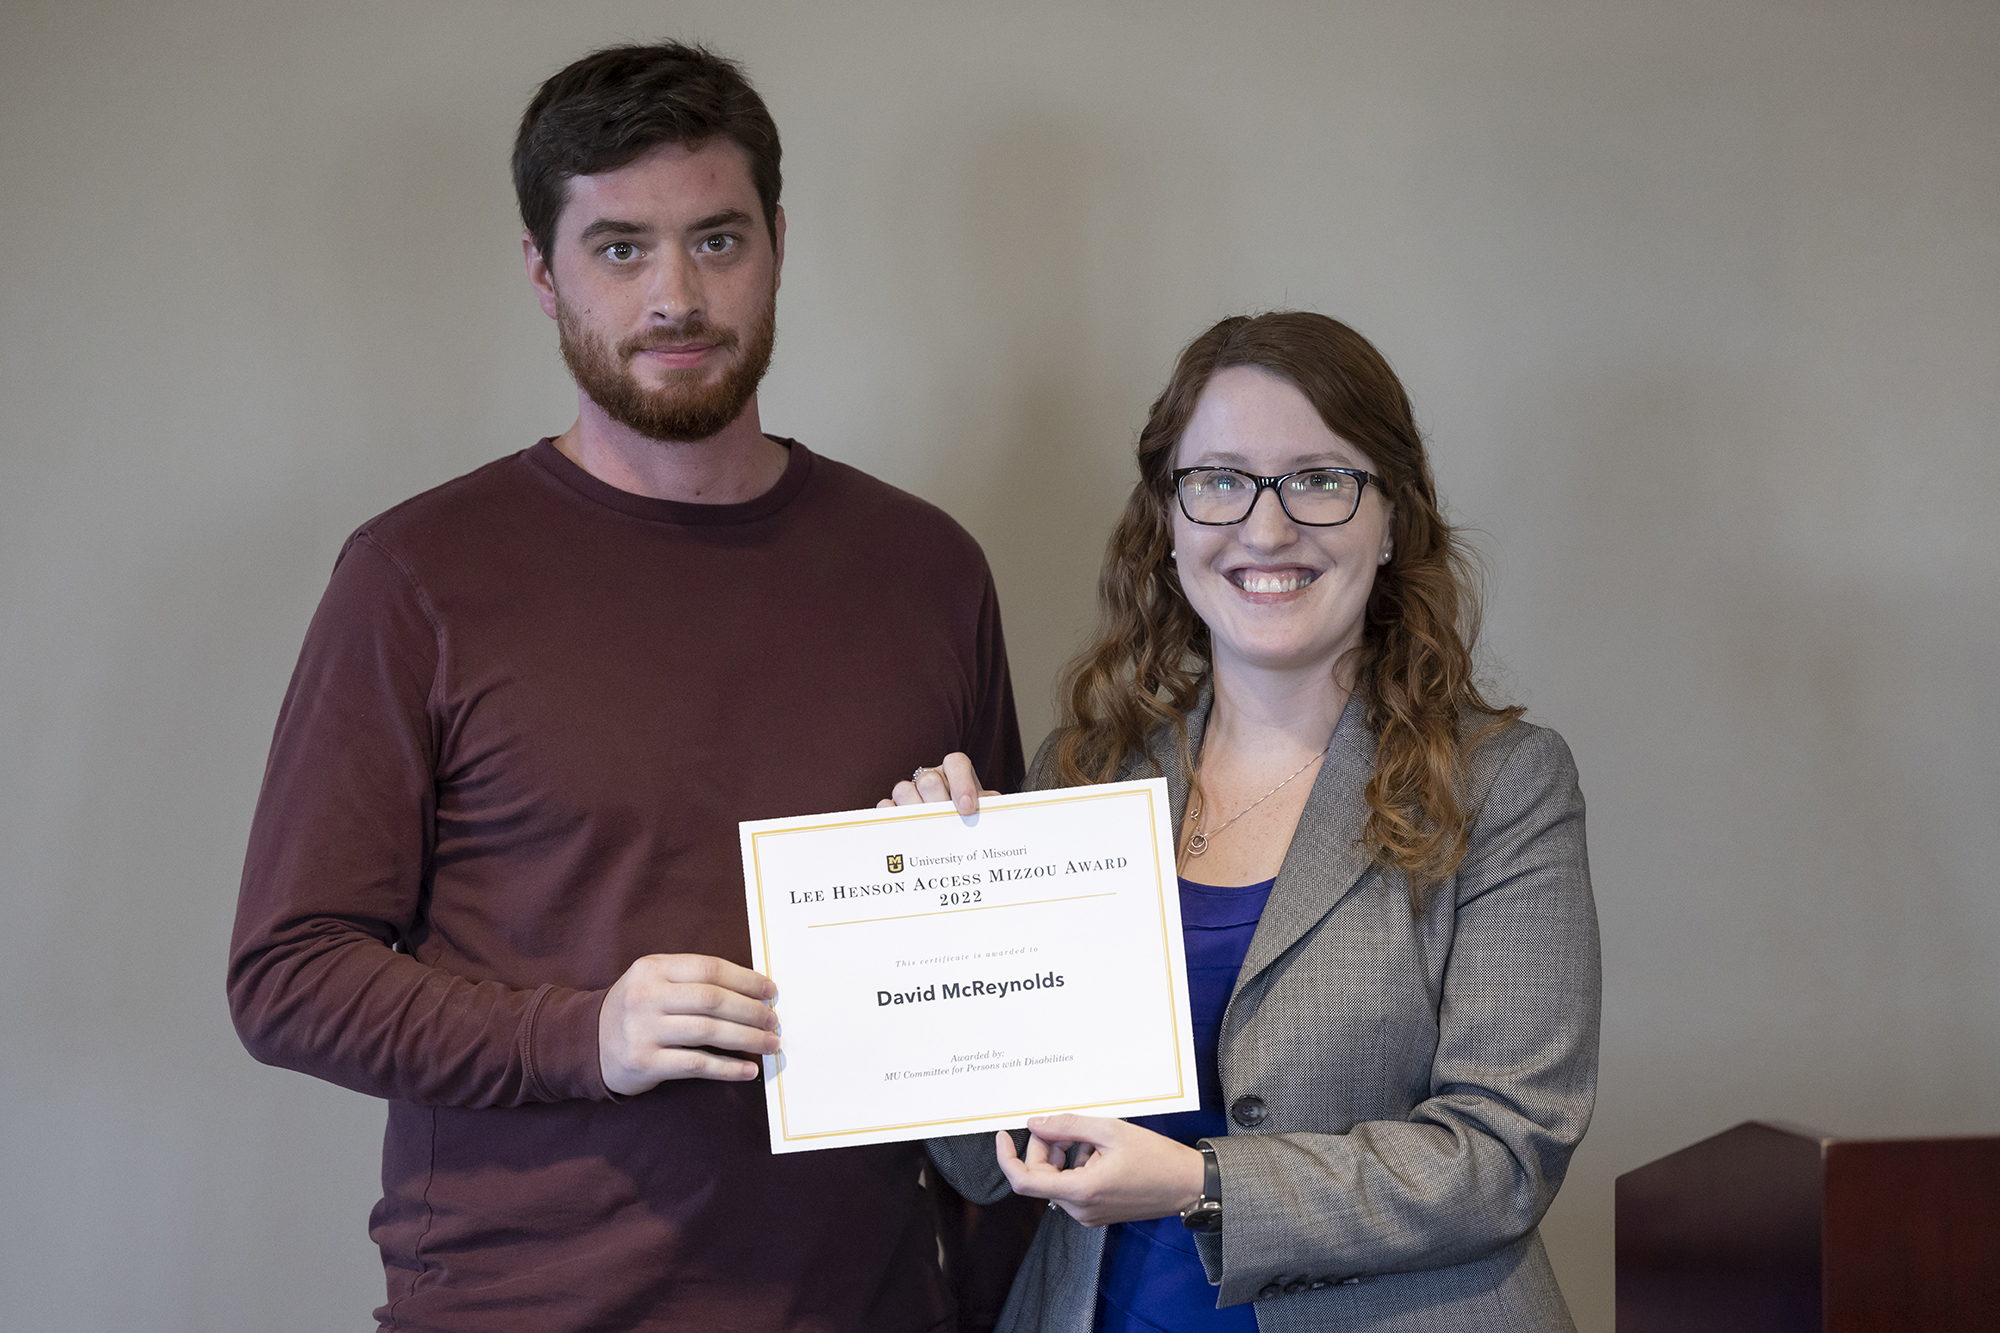 david mcreynolds and amber cheek pose with a certificate